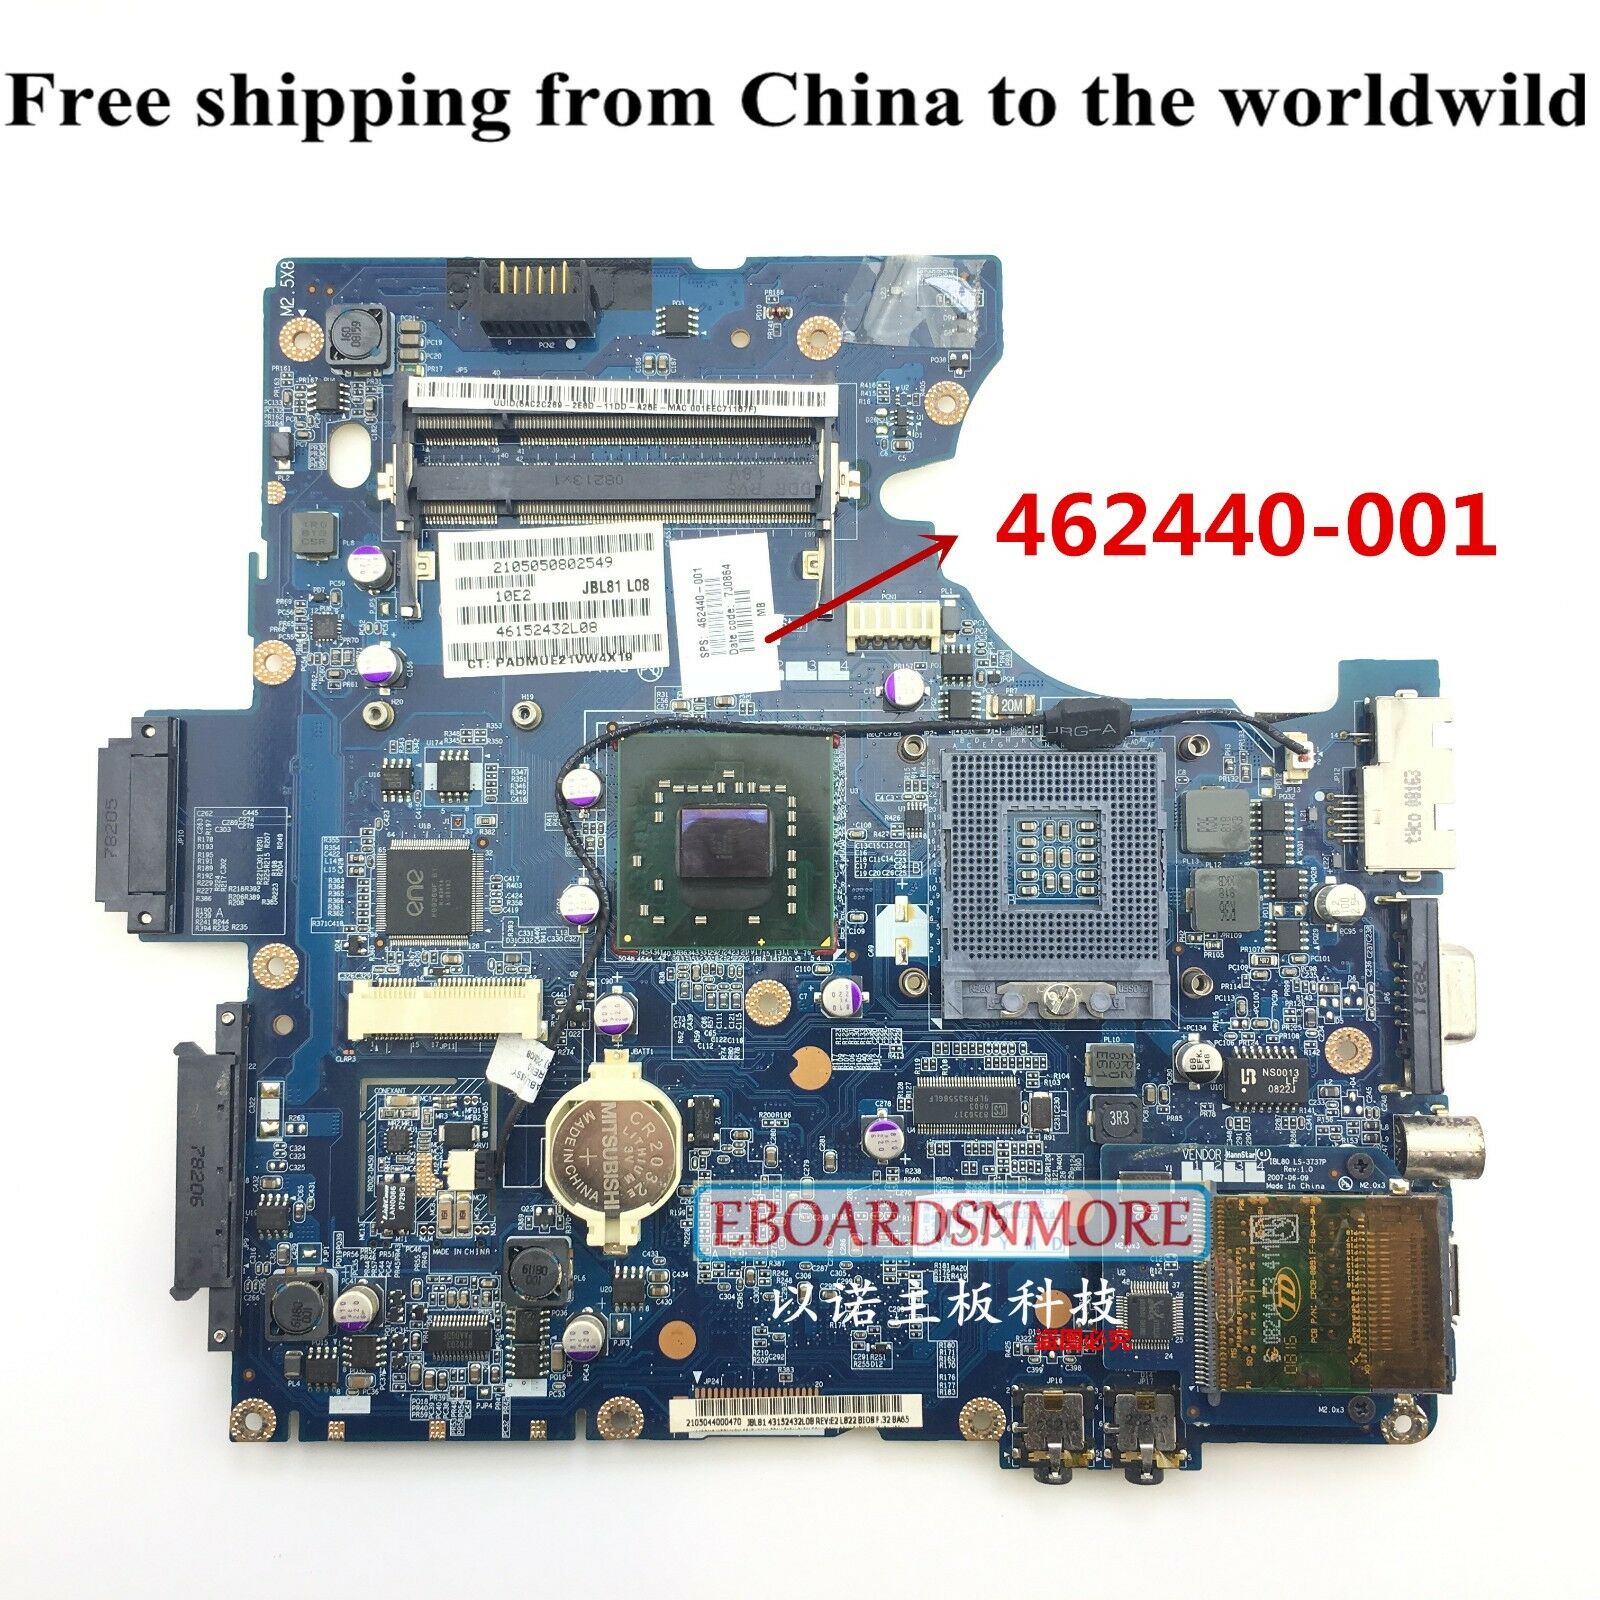 462440-001 Motherboard, JBL81 LA-4031P, for HP compal C700 G7000Laptop, A Compatible CPU Brand: Intel Memory - Click Image to Close